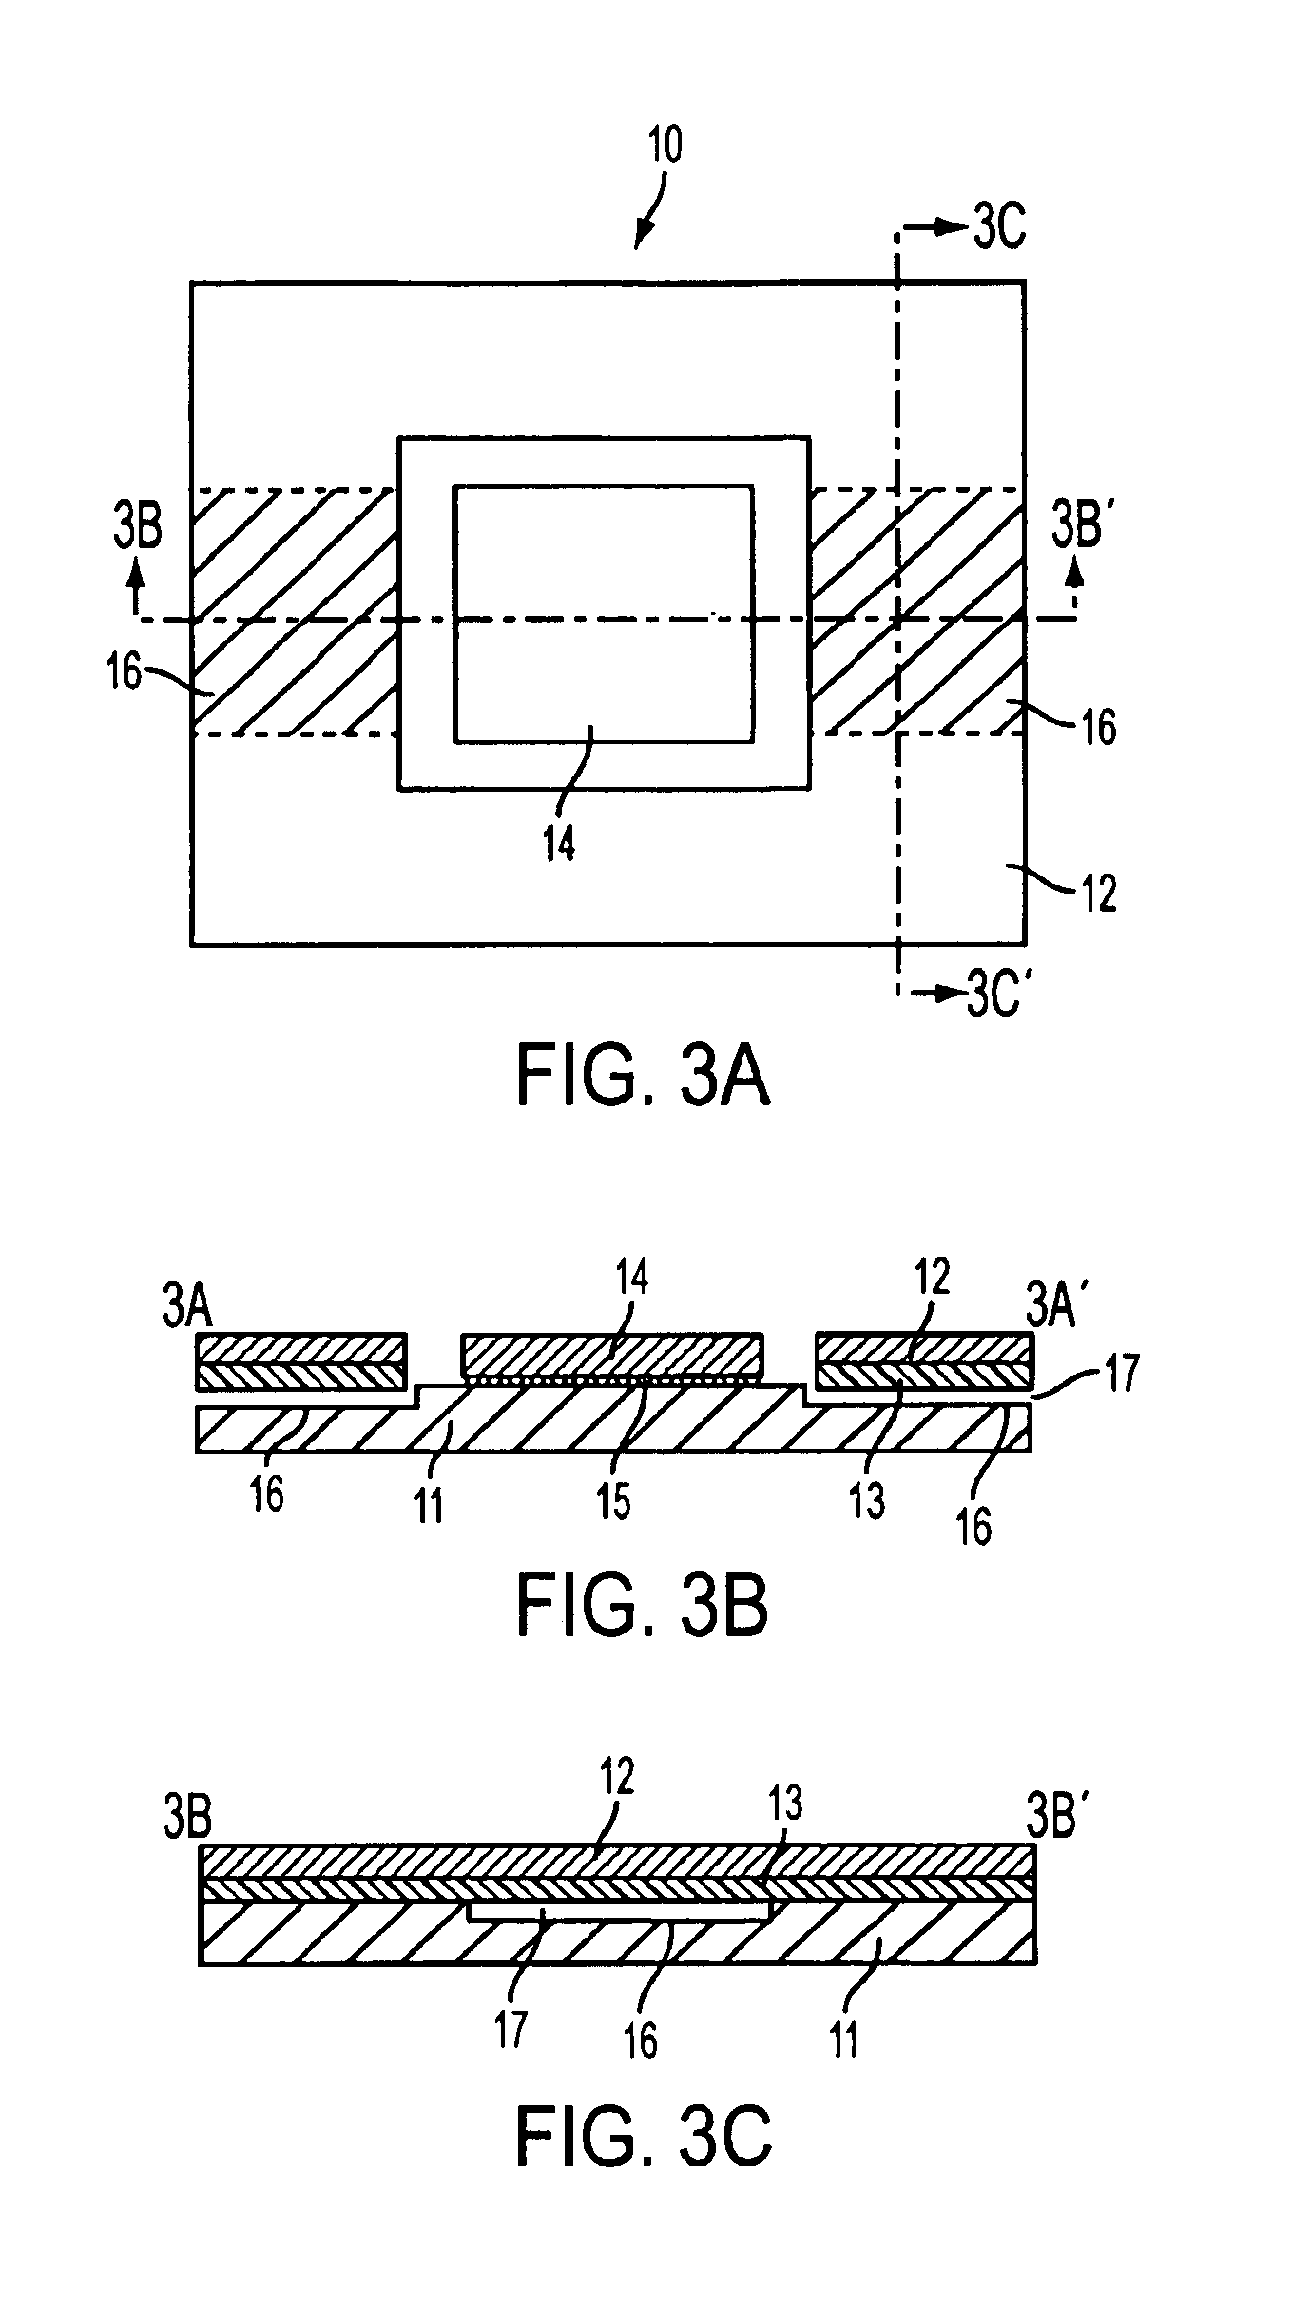 Flip-chip BGA semiconductor device for achieving a superior cleaning effect